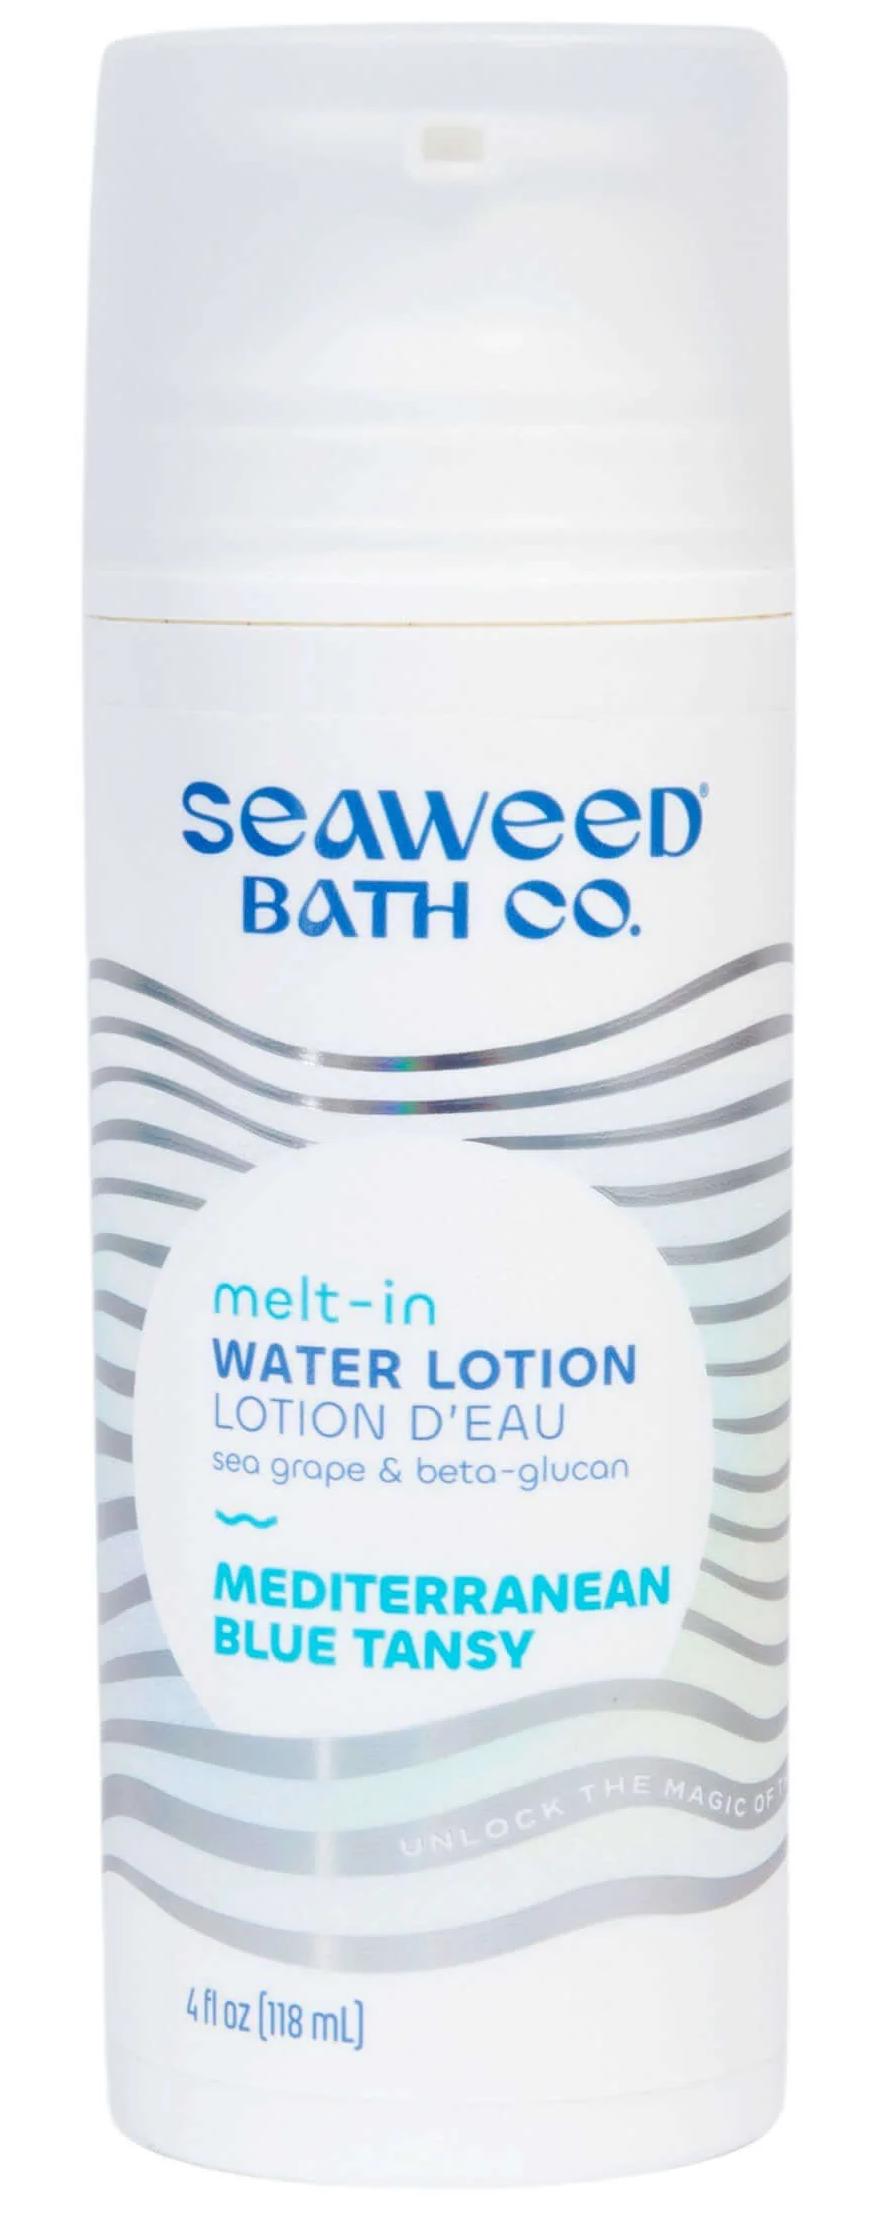 SEAWEED BATH CO: Melt-in Water Lotion Mediterranean Blue Tansy 4 OUNCE